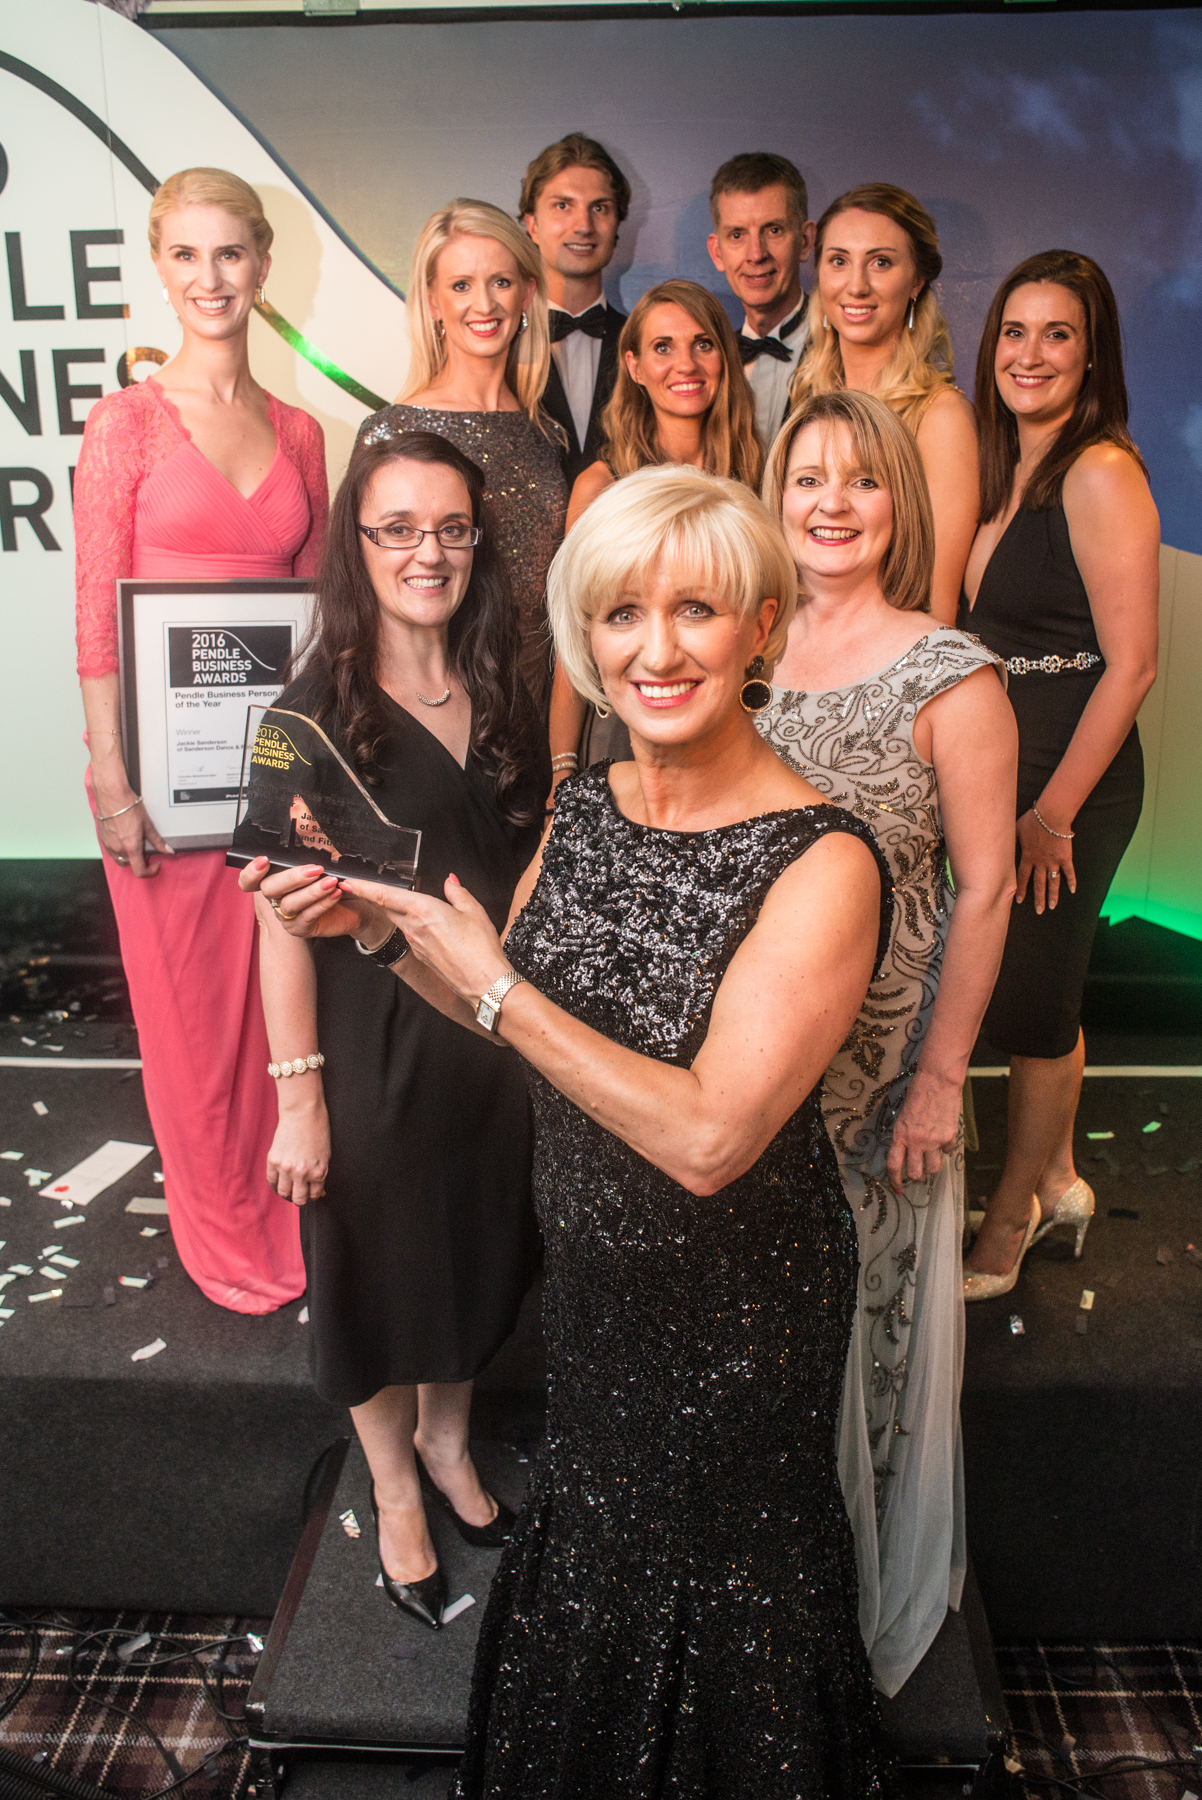 Fantastic number of entries to Pendle Business Awards 2018!